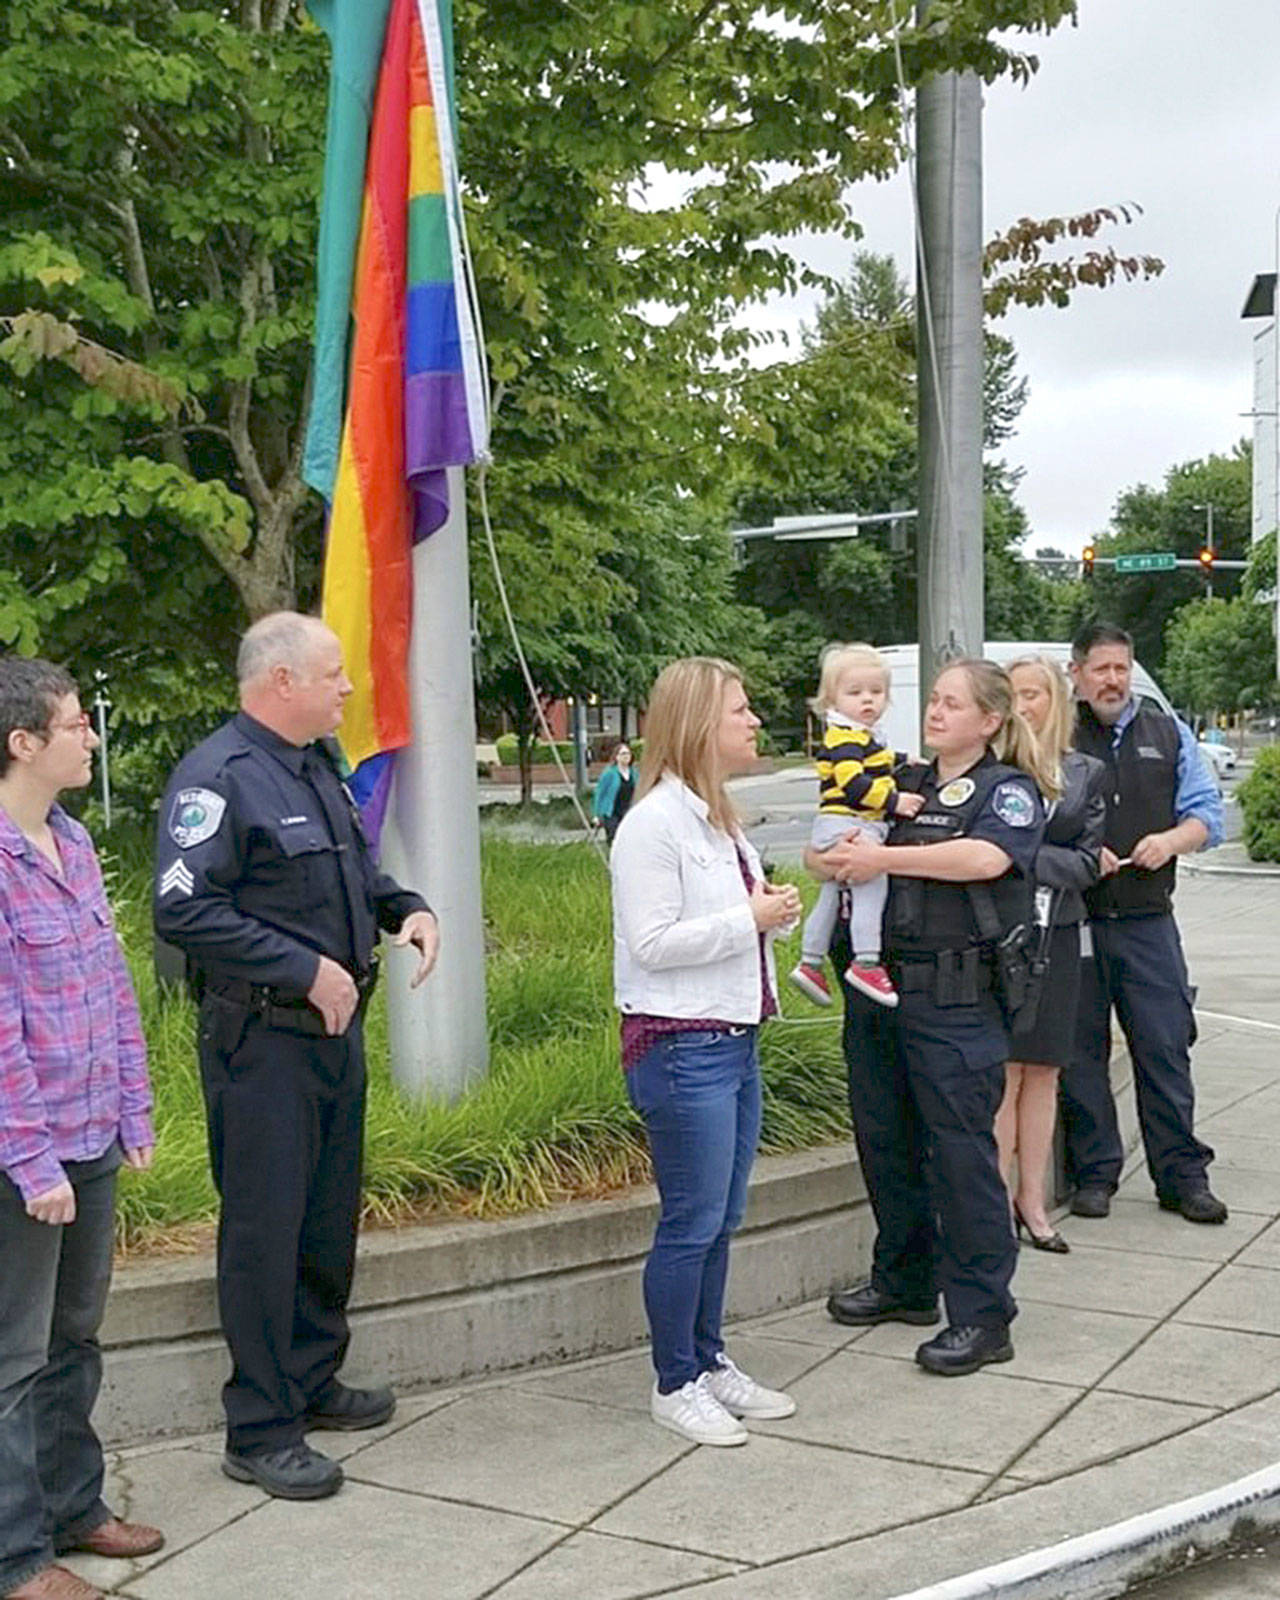 In honor of Pride Month, City Staff and Council President Angela Birney raised the Pride flag at City Hall on June 17. Courtesy photo of City Redmond Facebook